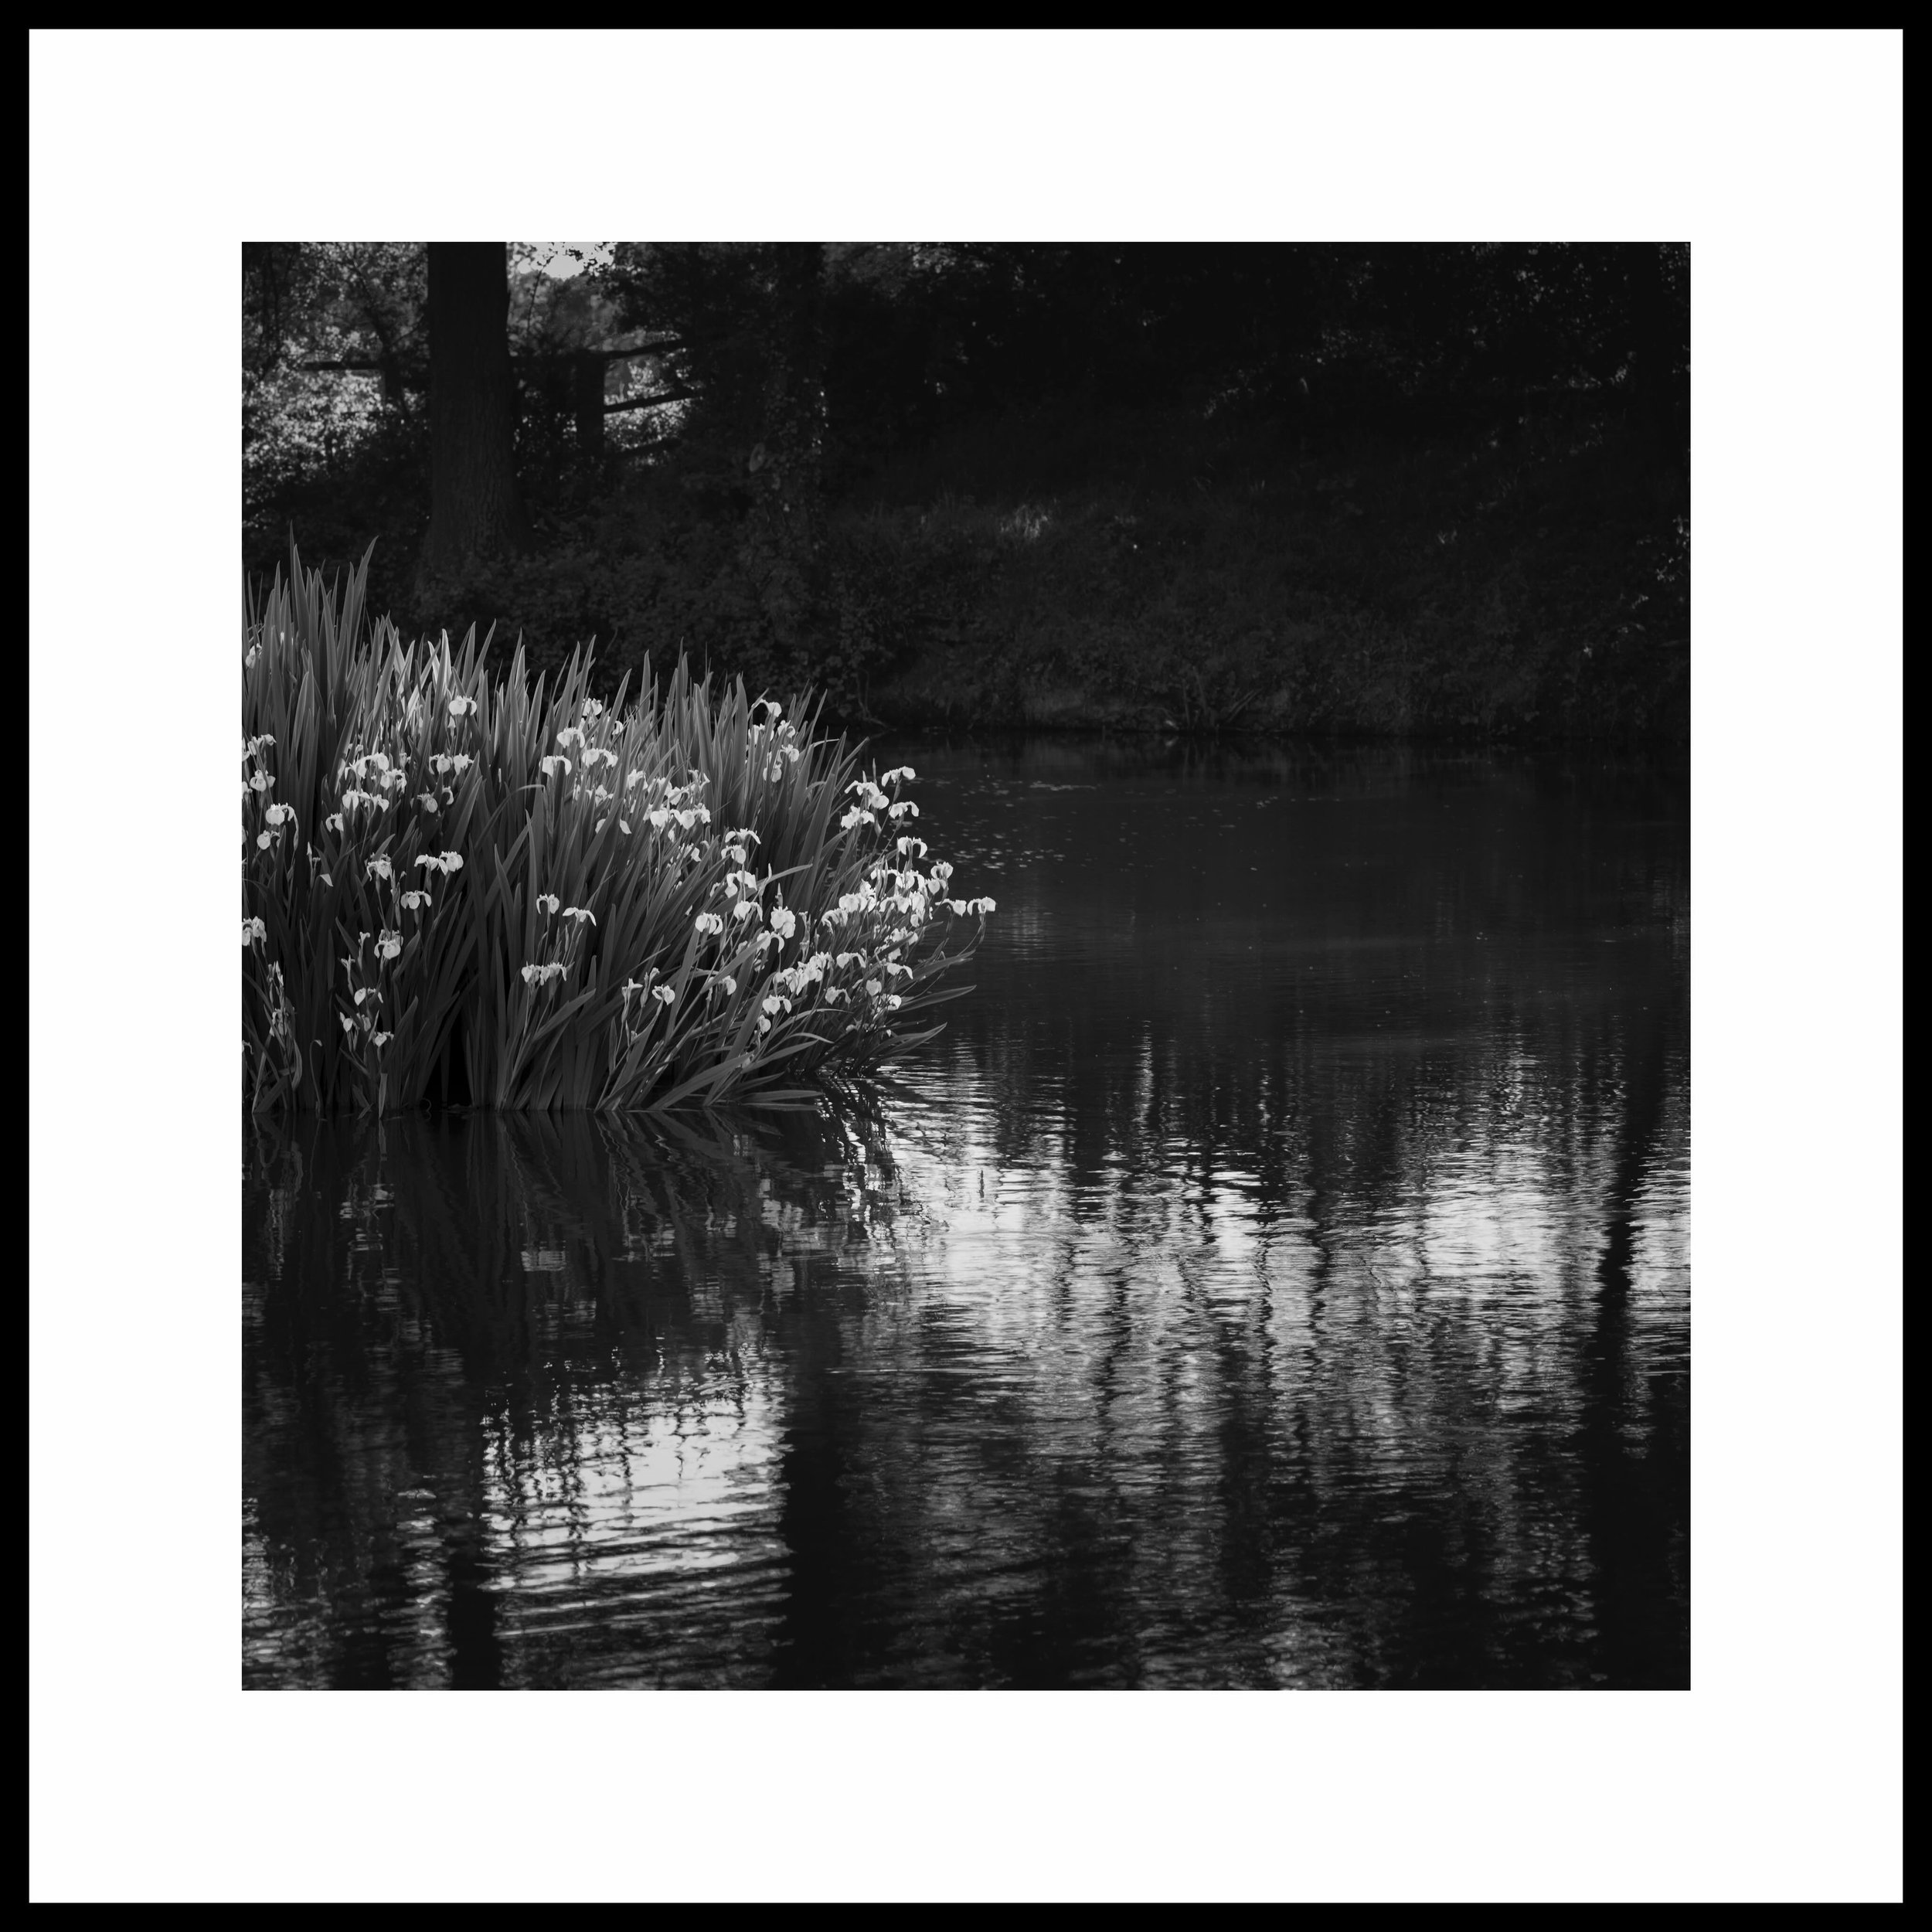 I often wonder if beautiful things view themselves as we do? I know that sounds daft but take these Irises, surrounded by water, competing for the energy of the sun, their reflection permanently distorted by the wind and activity of wildlife using th